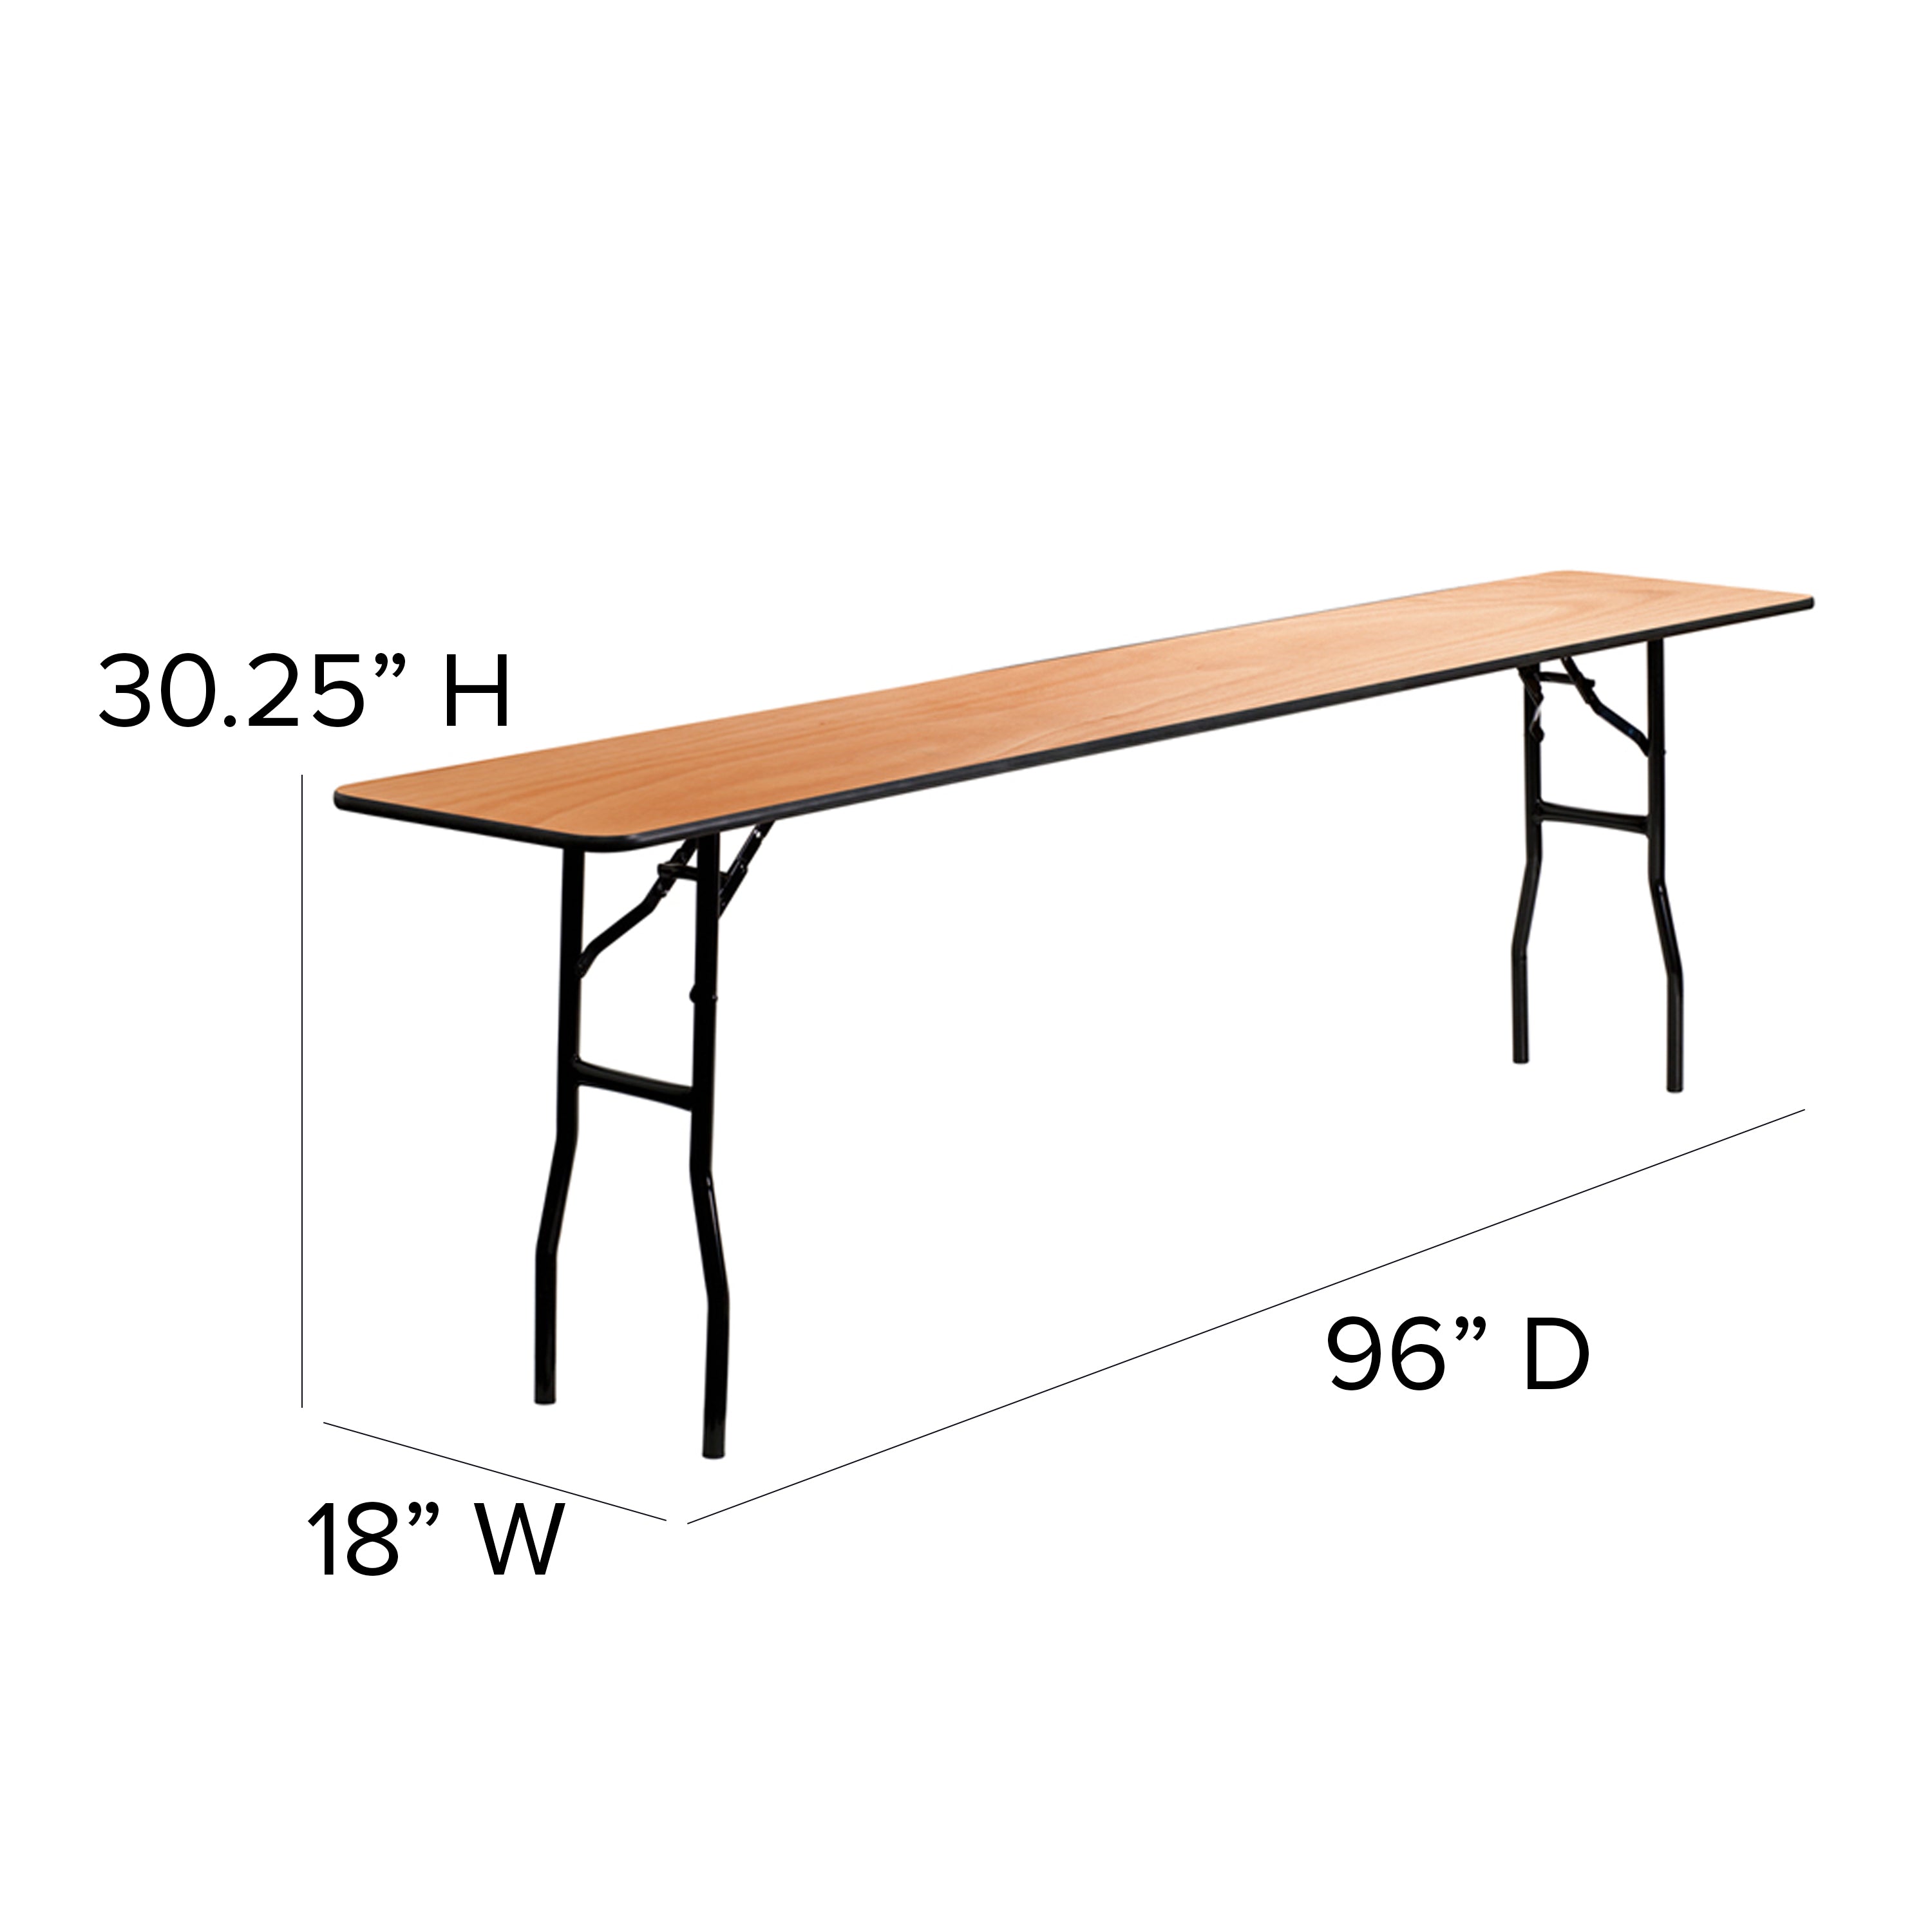 8-Foot Rectangular Wood Folding Training / Seminar Table with Smooth Clear Coated Finished Top-Rectangular Folding Table-Flash Furniture-Wall2Wall Furnishings